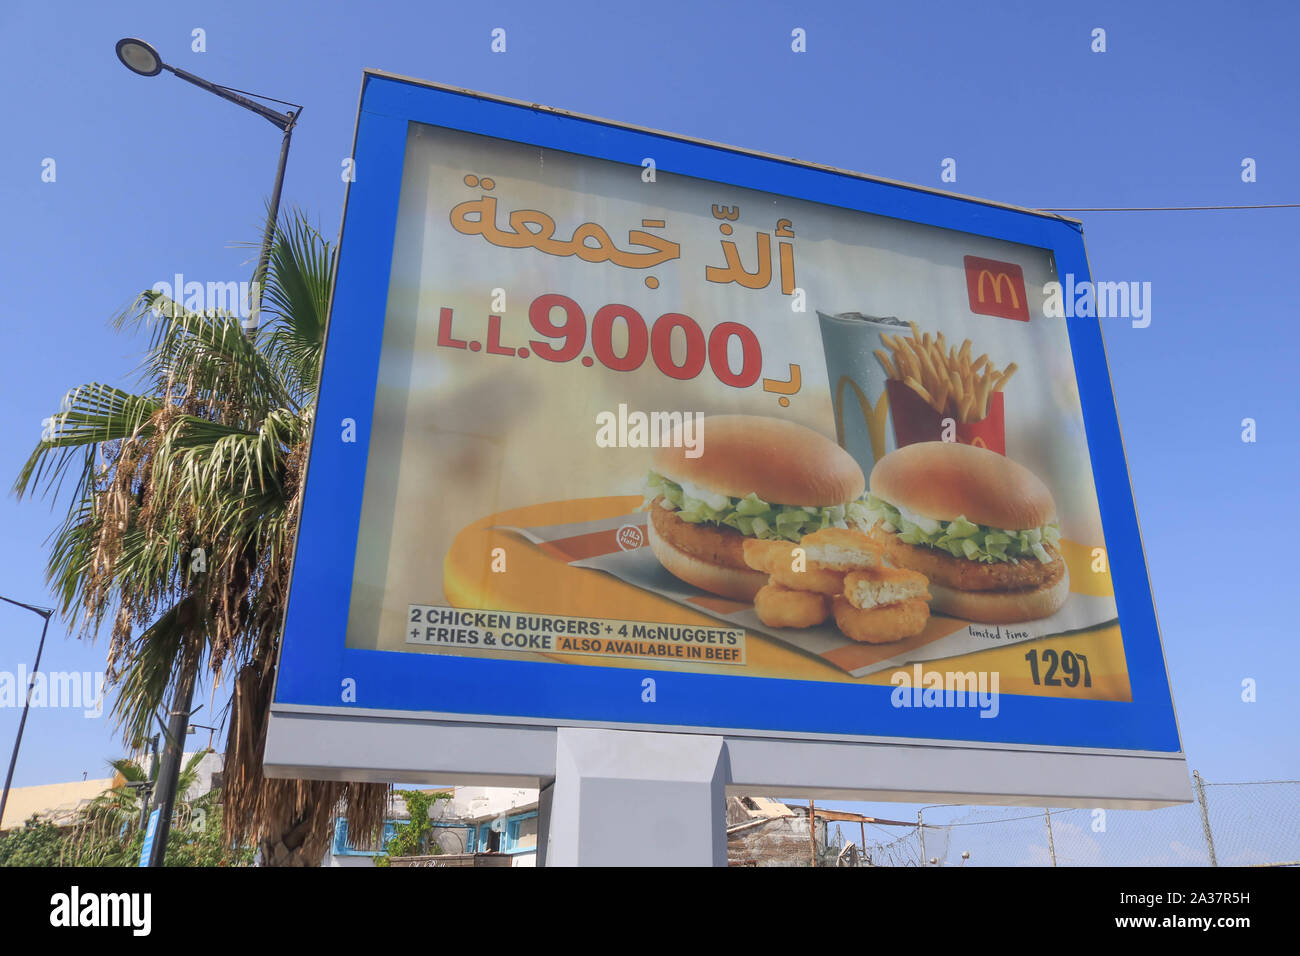 October 6, 2019, Beirut, Lebanon: McDonalds chicken burgers advertising board in Beirut. (Credit Image: © Amer Ghazzal/SOPA Images via ZUMA Wire) Stock Photo